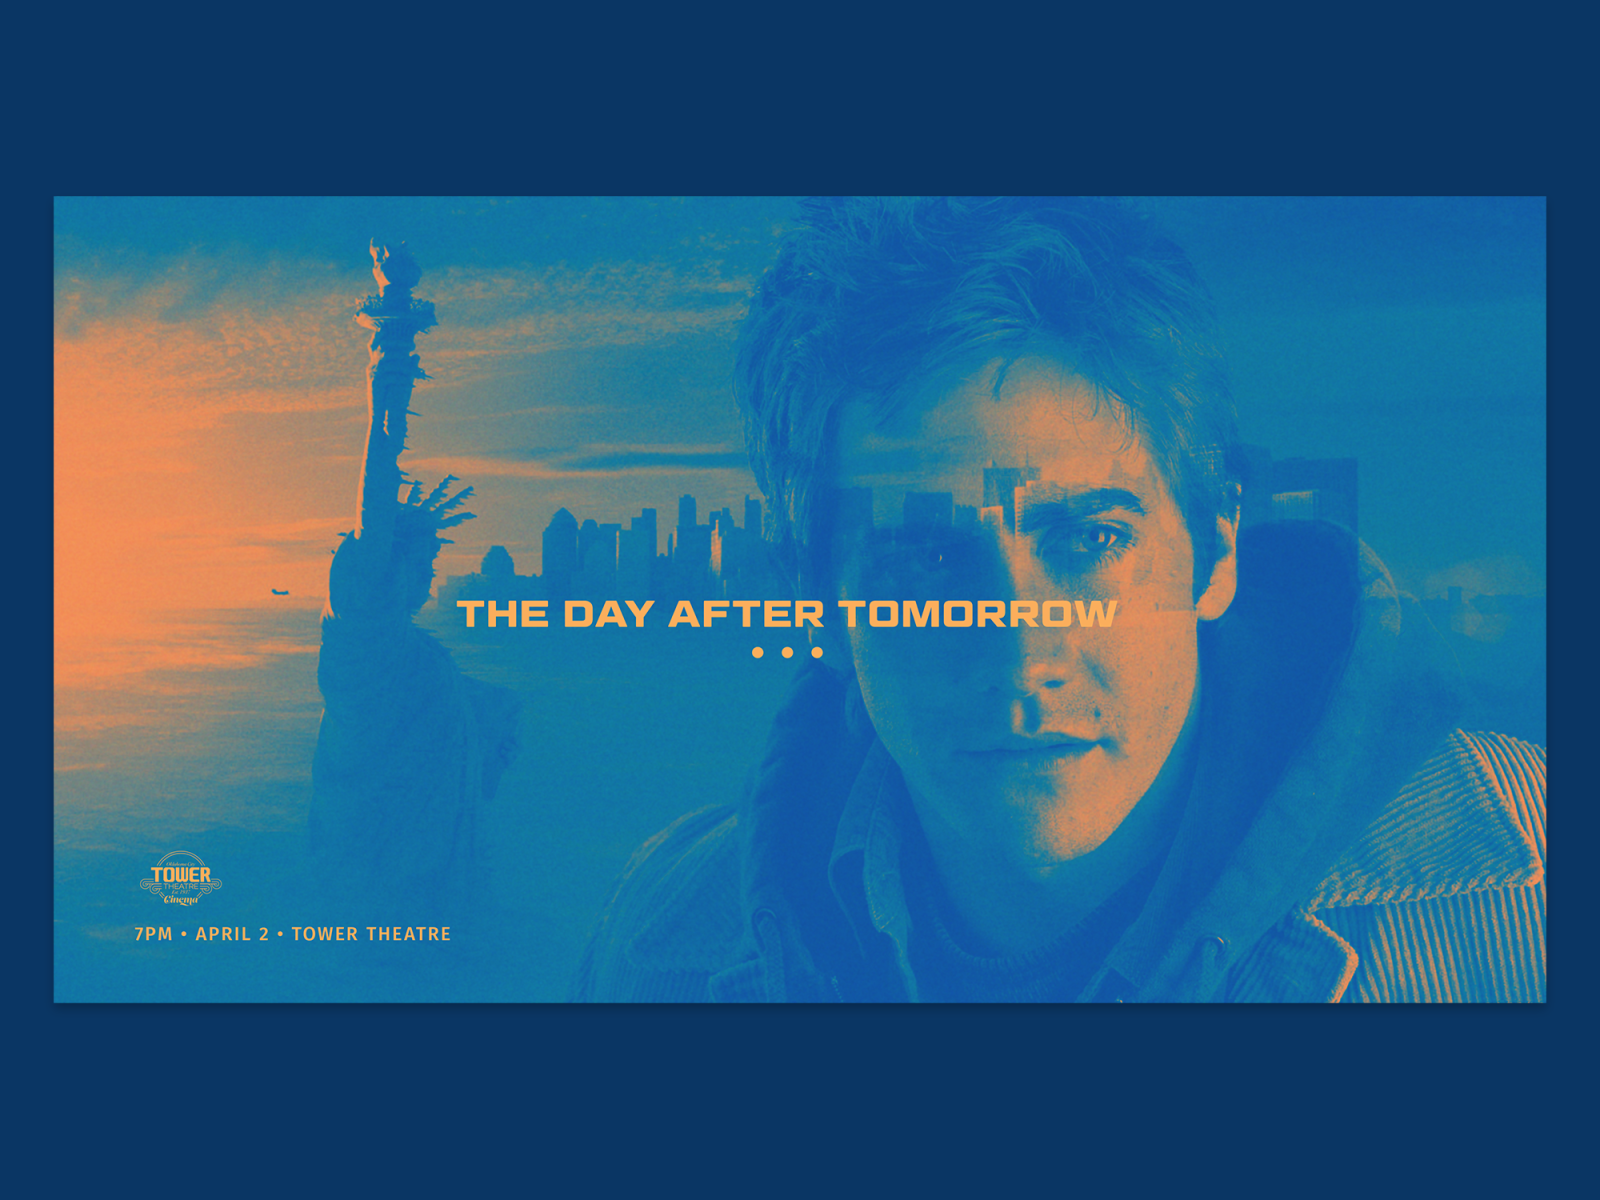 The Day After Tomorrow Screening Promo By Zachary Burns On Dribbble